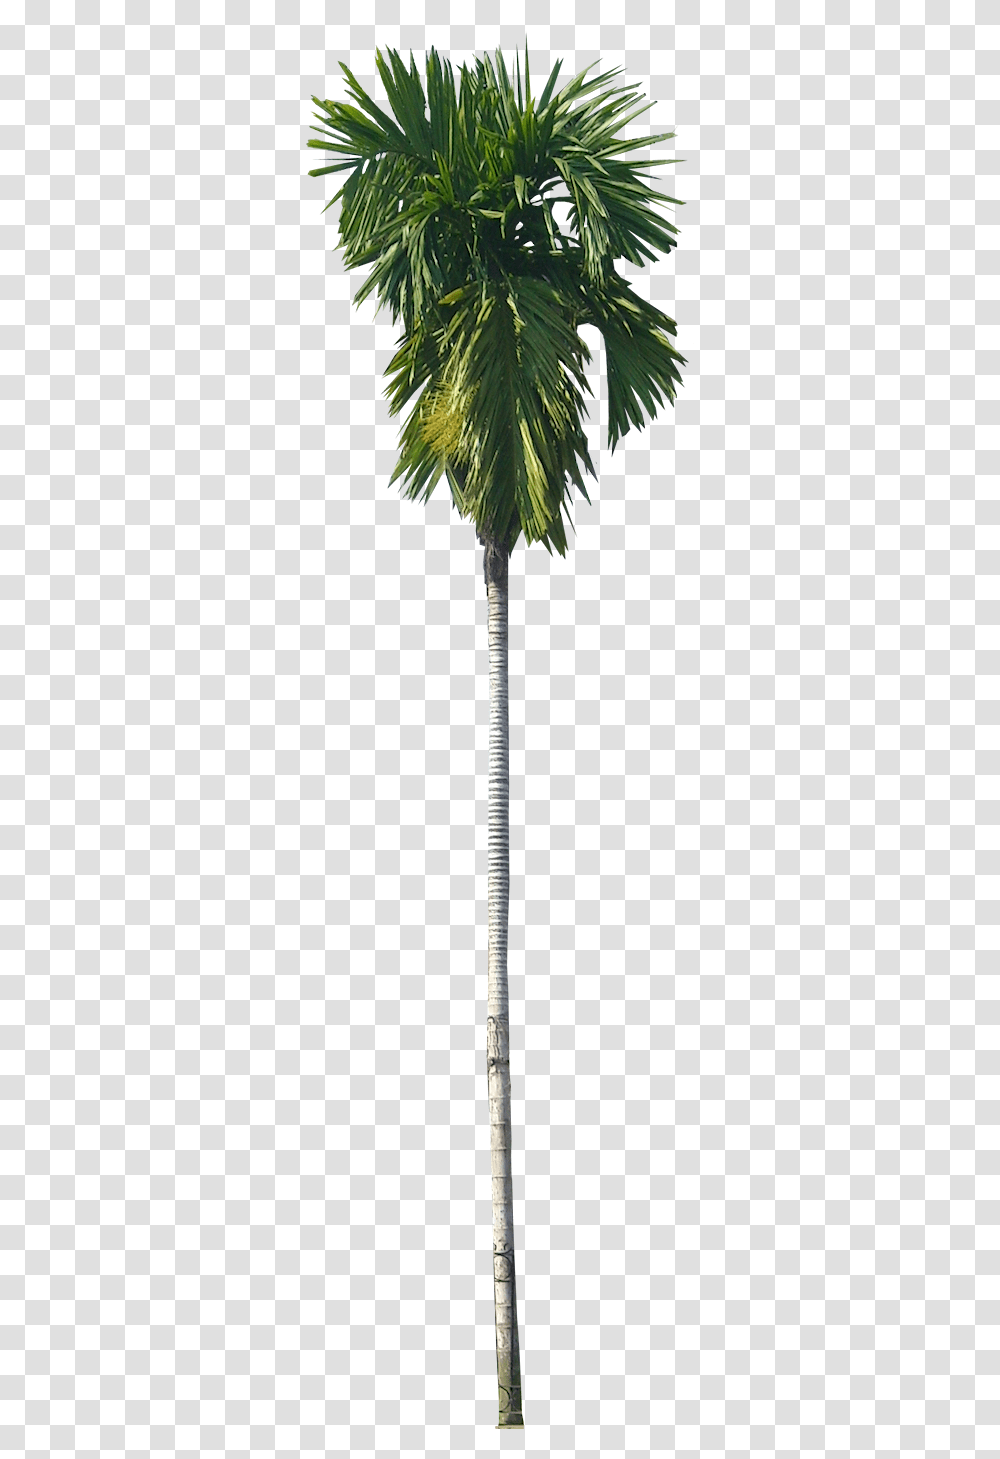 Find This Pin And More On Tree Cut Out Cambodian Plants Betel Nut Palm, Palm Tree, Arecaceae Transparent Png